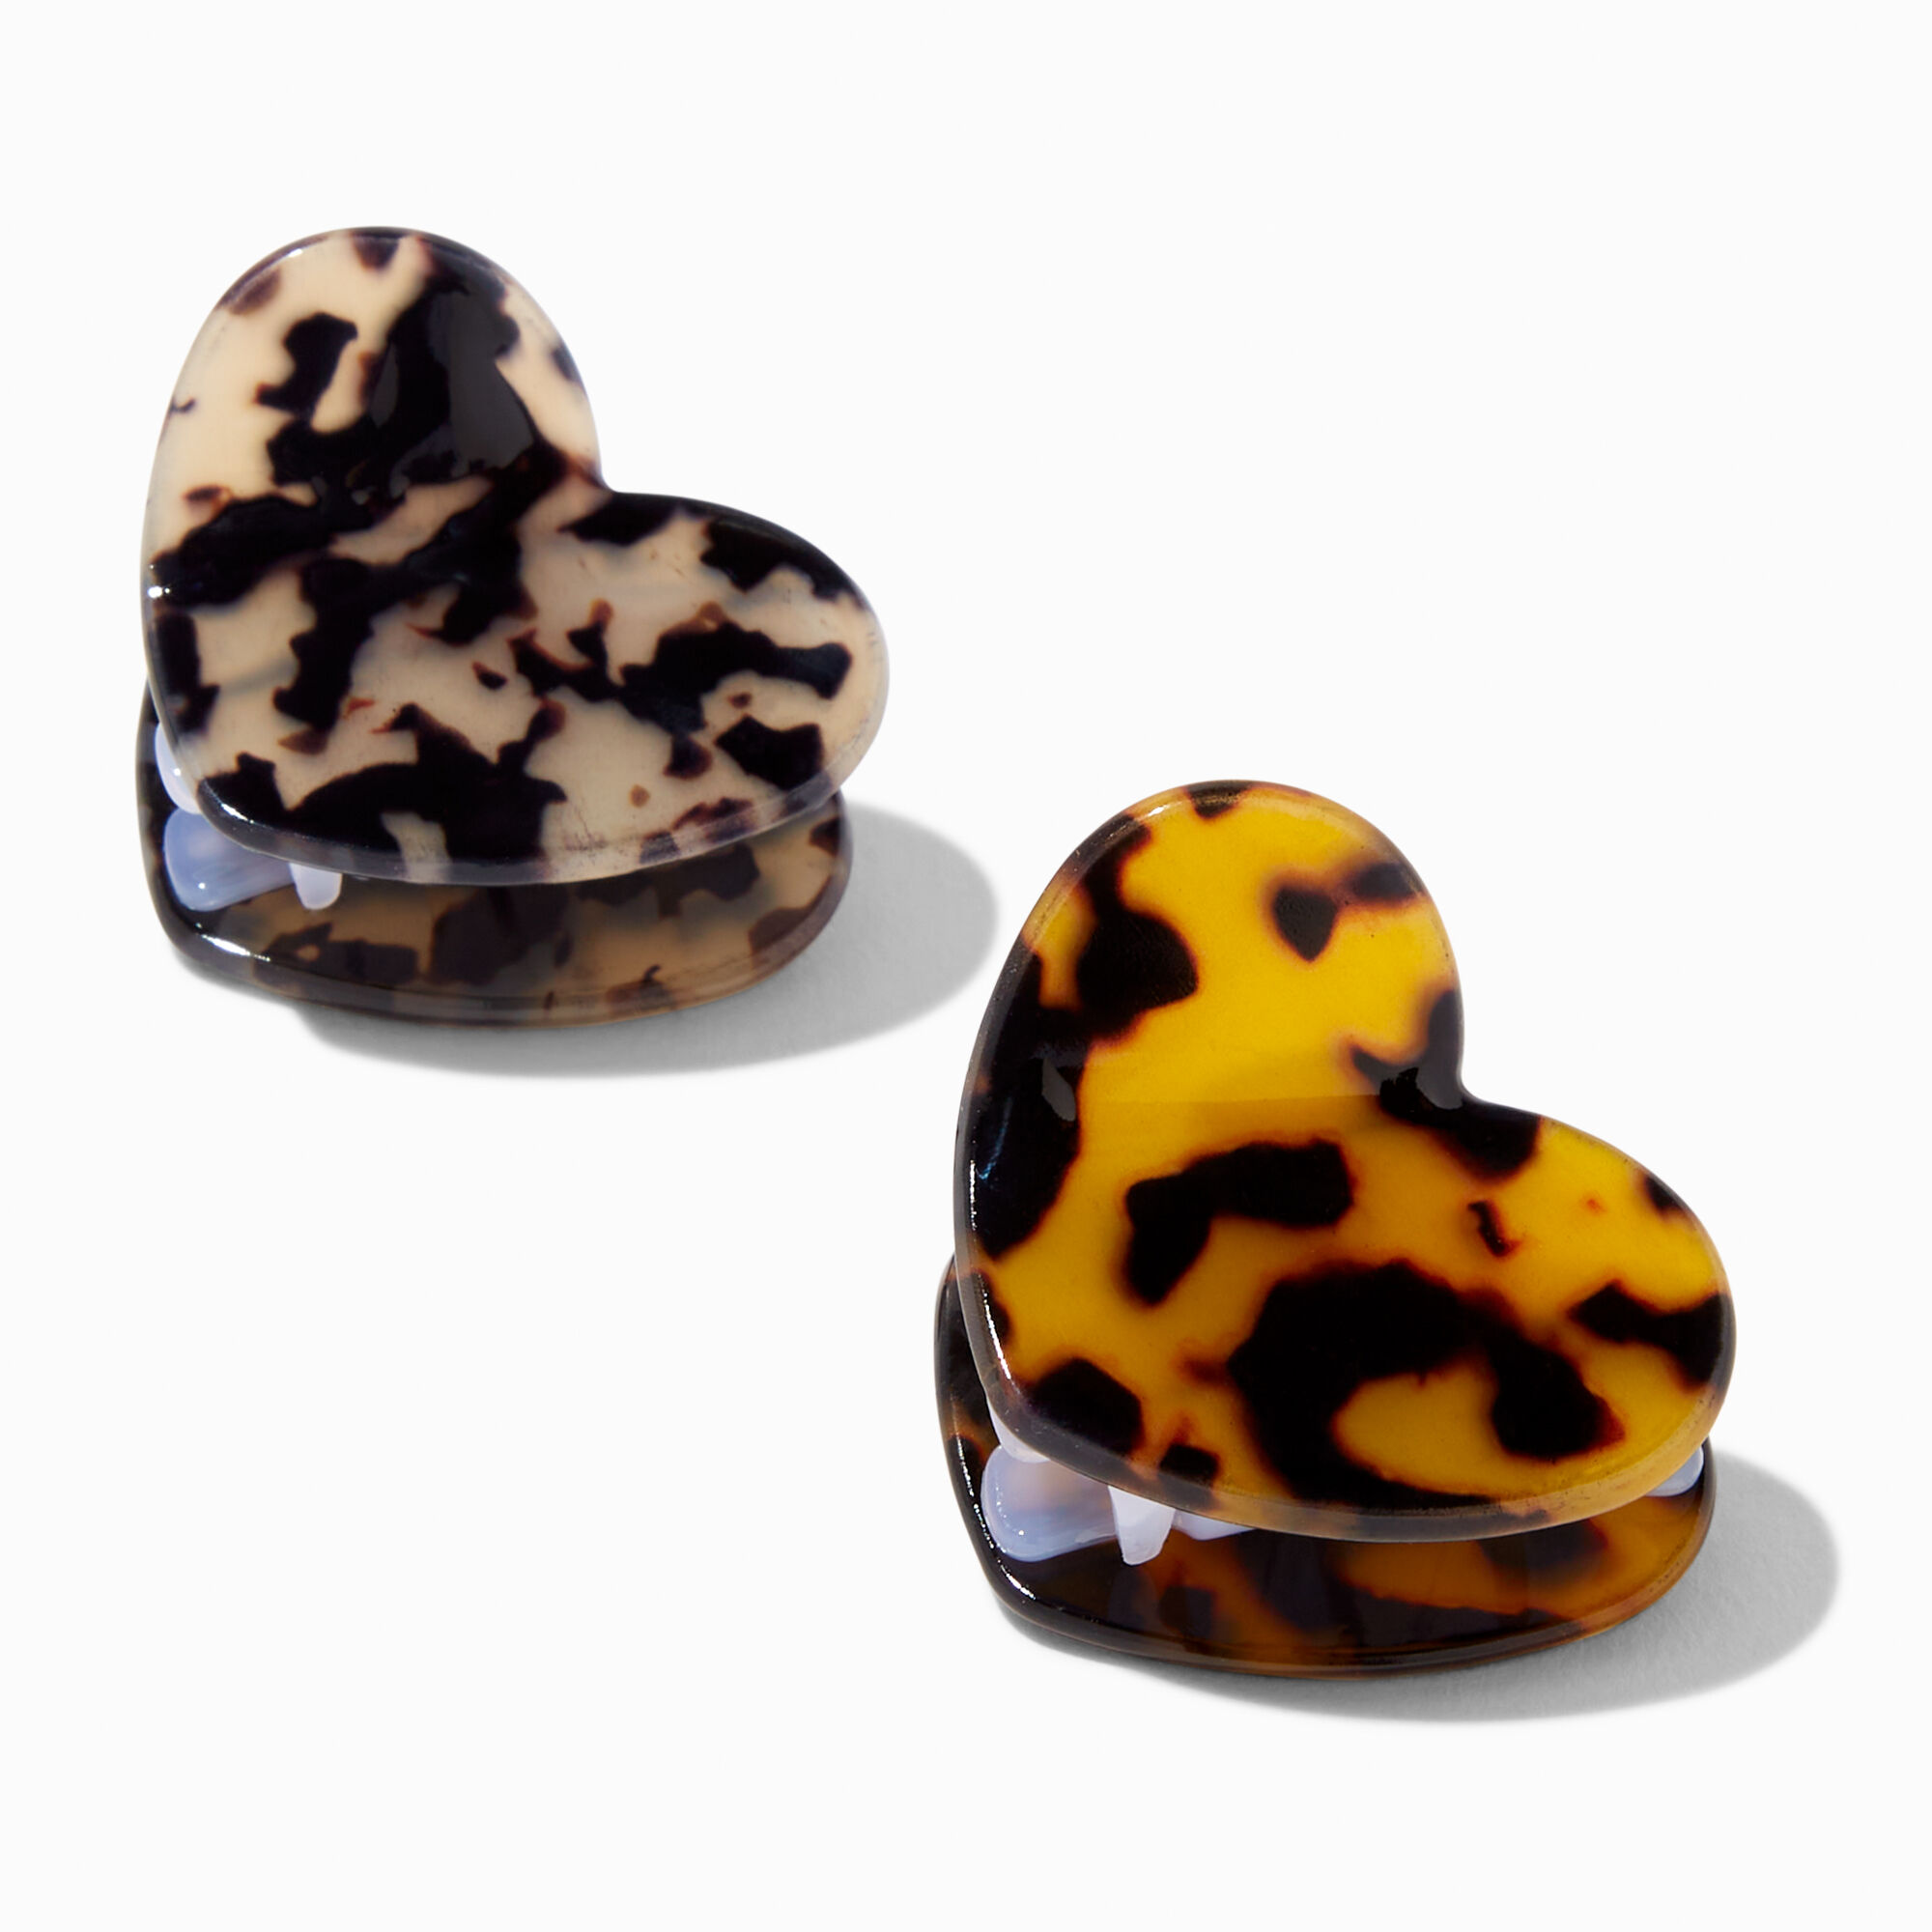 View Claires Tortoiseshell Heart Hair Claws 2 Pack information